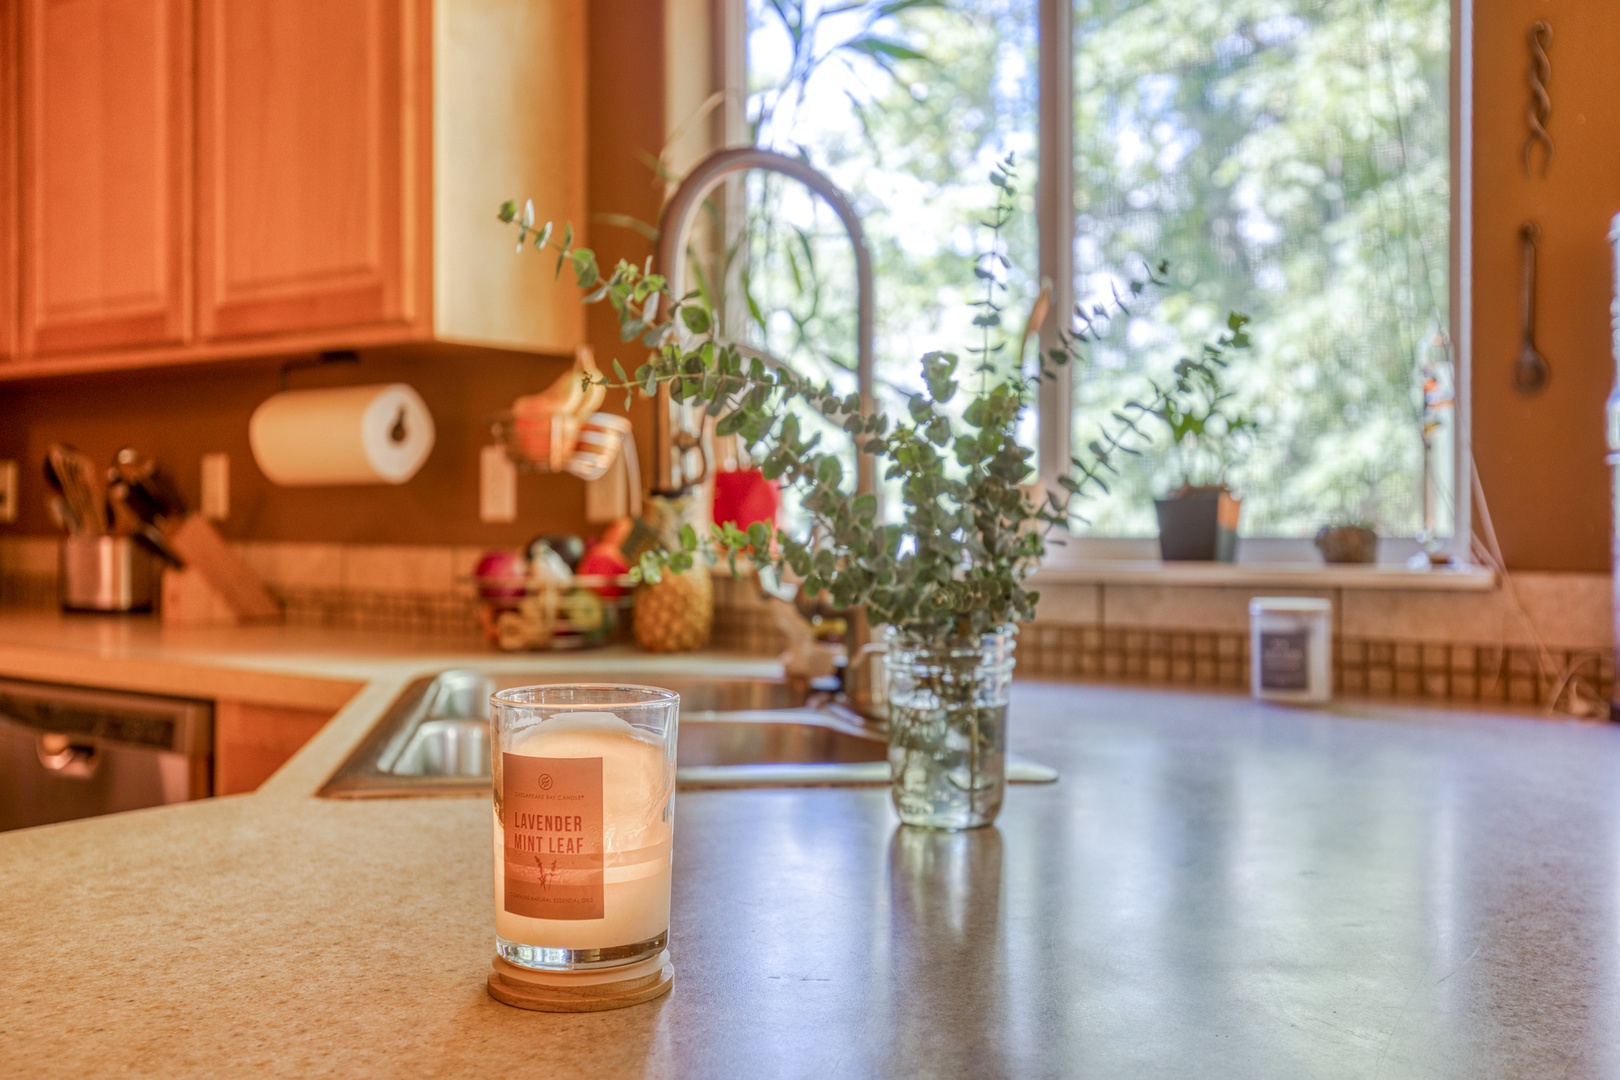 Clackamas Vacation Rentals, Duck Crossing - The kitchen is truly the heart of the home